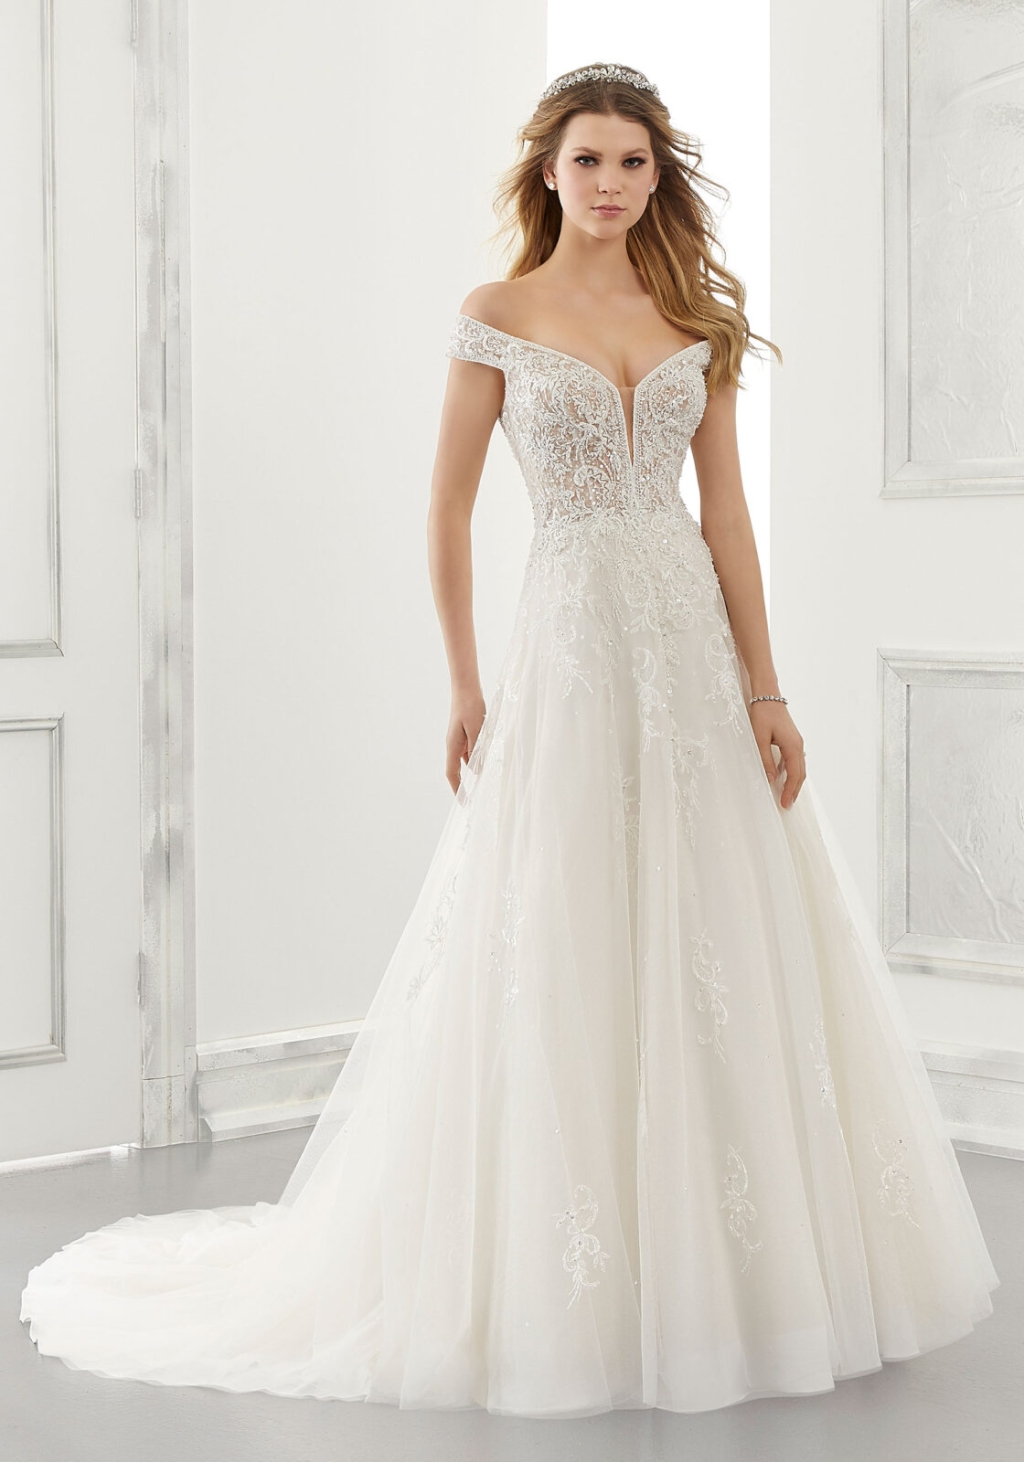 SAMPLE SALE GOWN - Alessandra